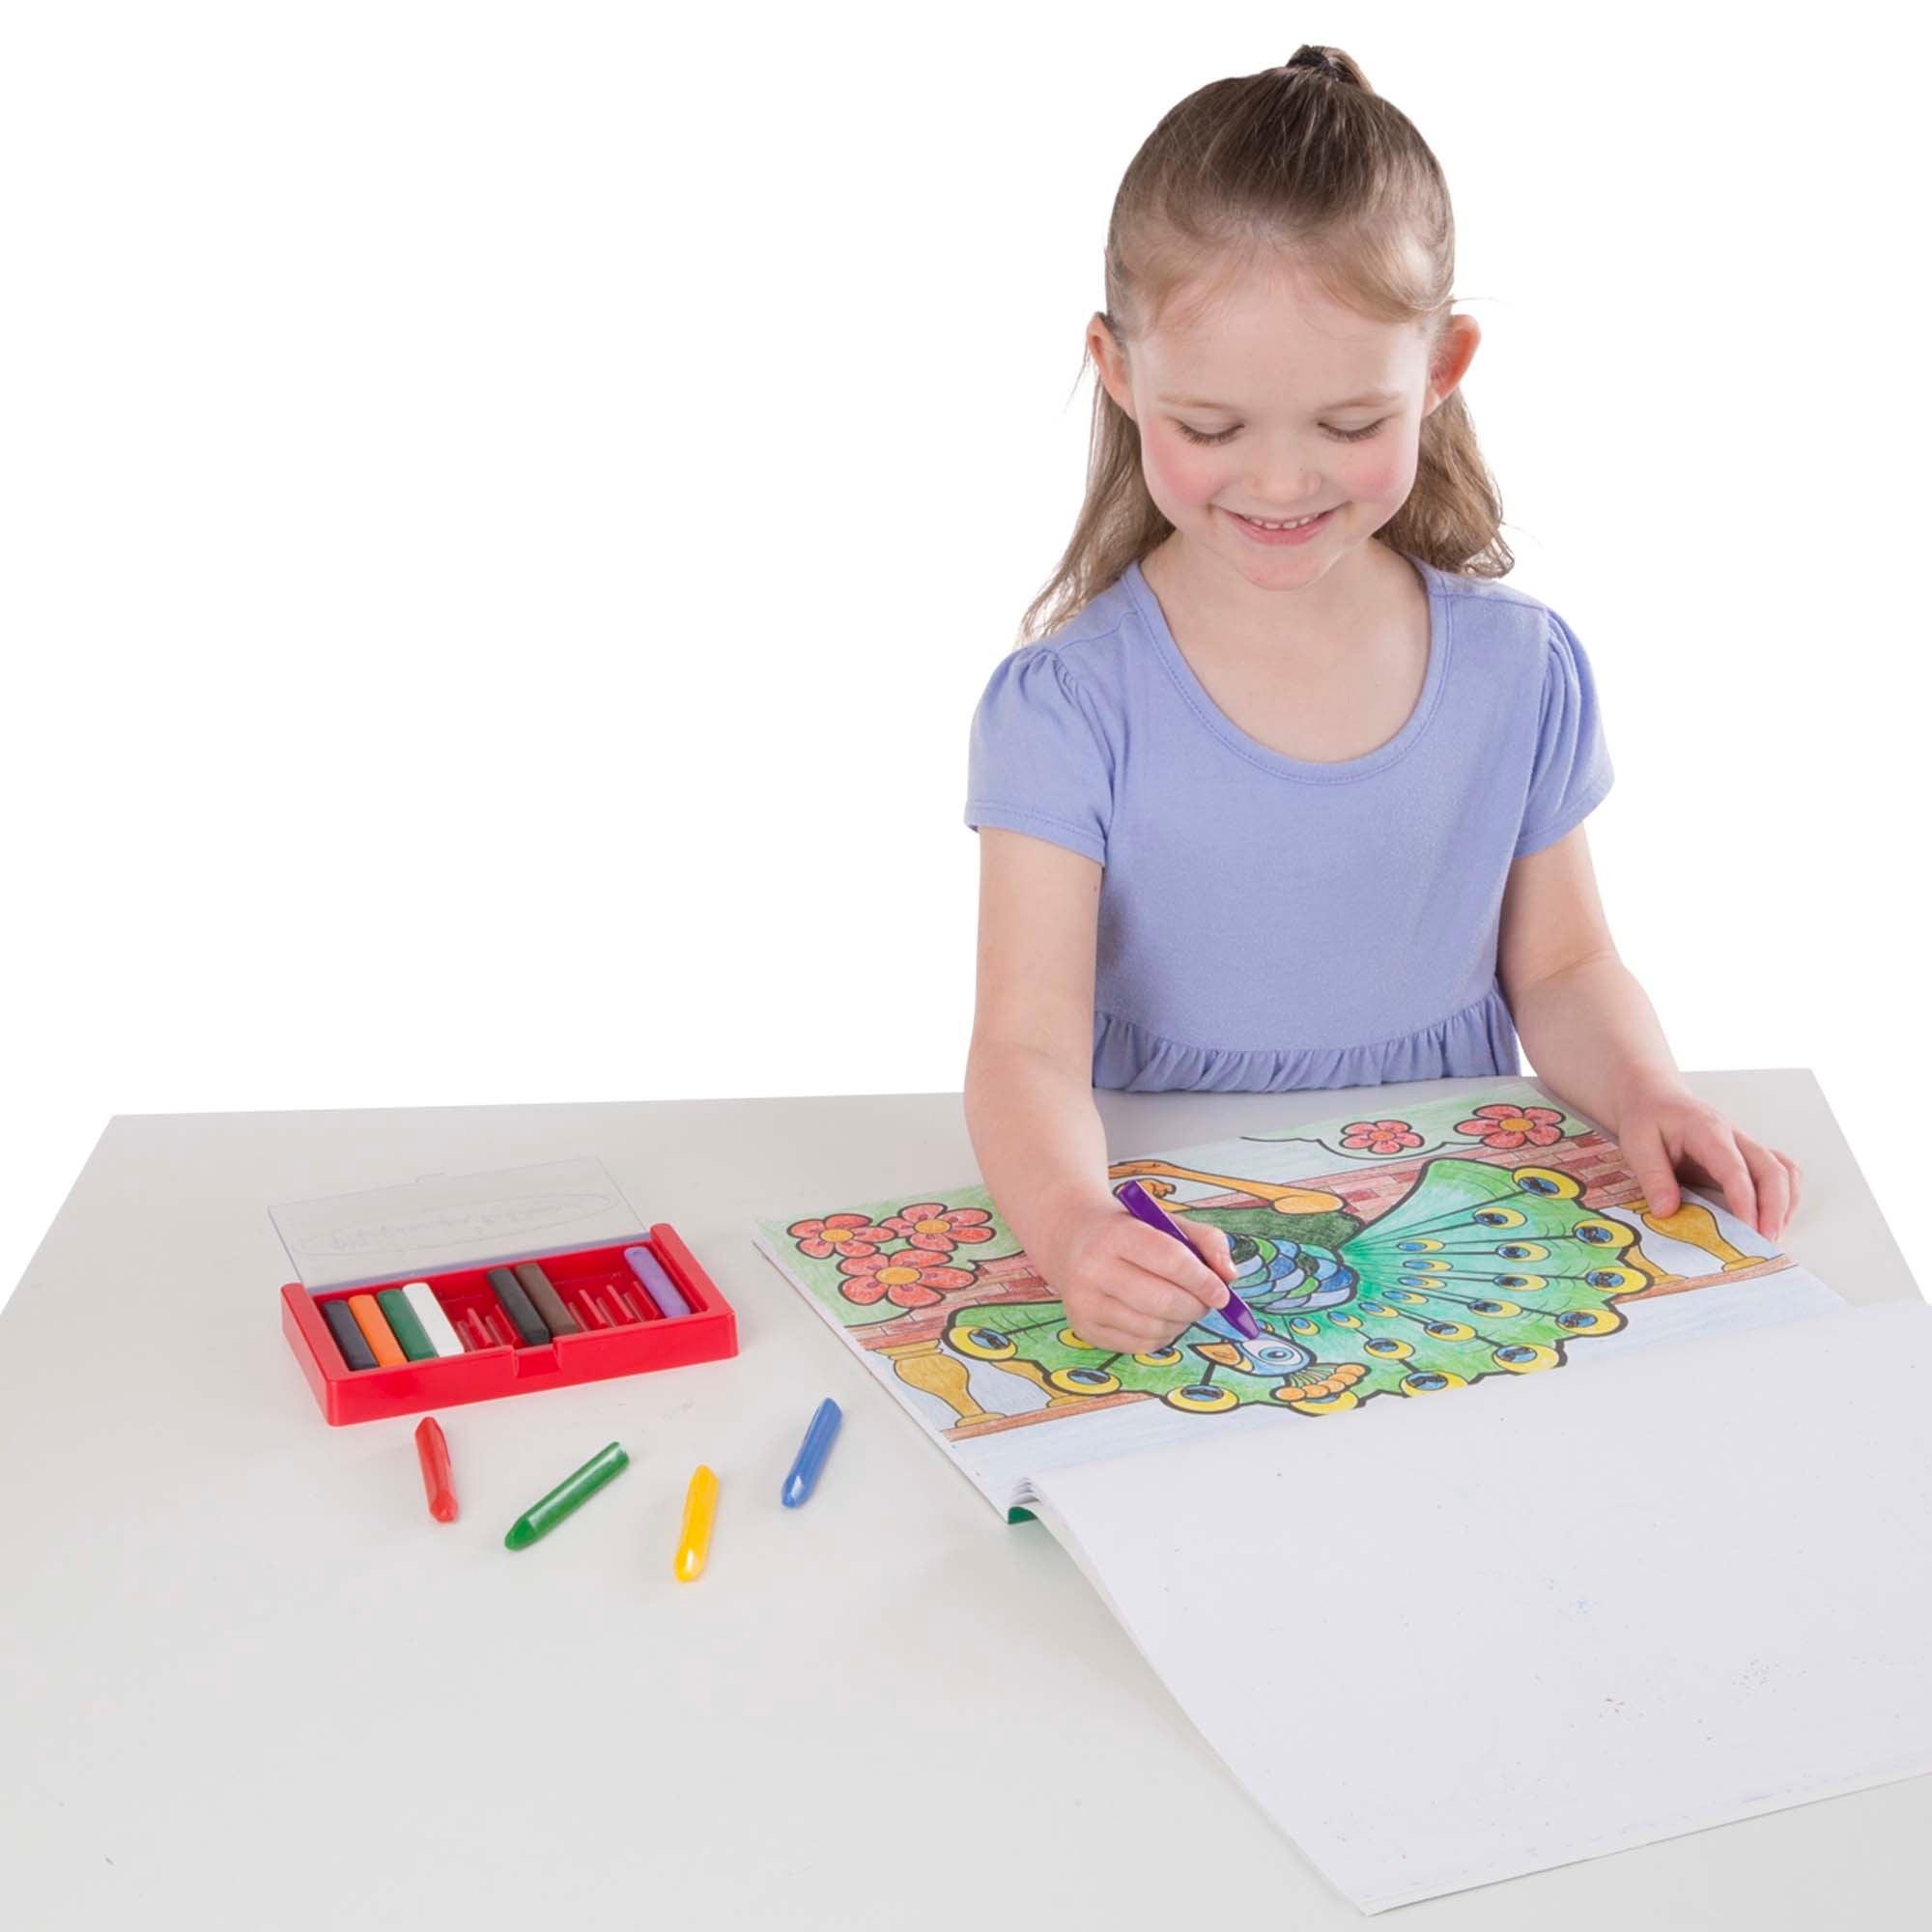 Toys - Melissa & Doug - On the Go - Magicolor Coloring Pad